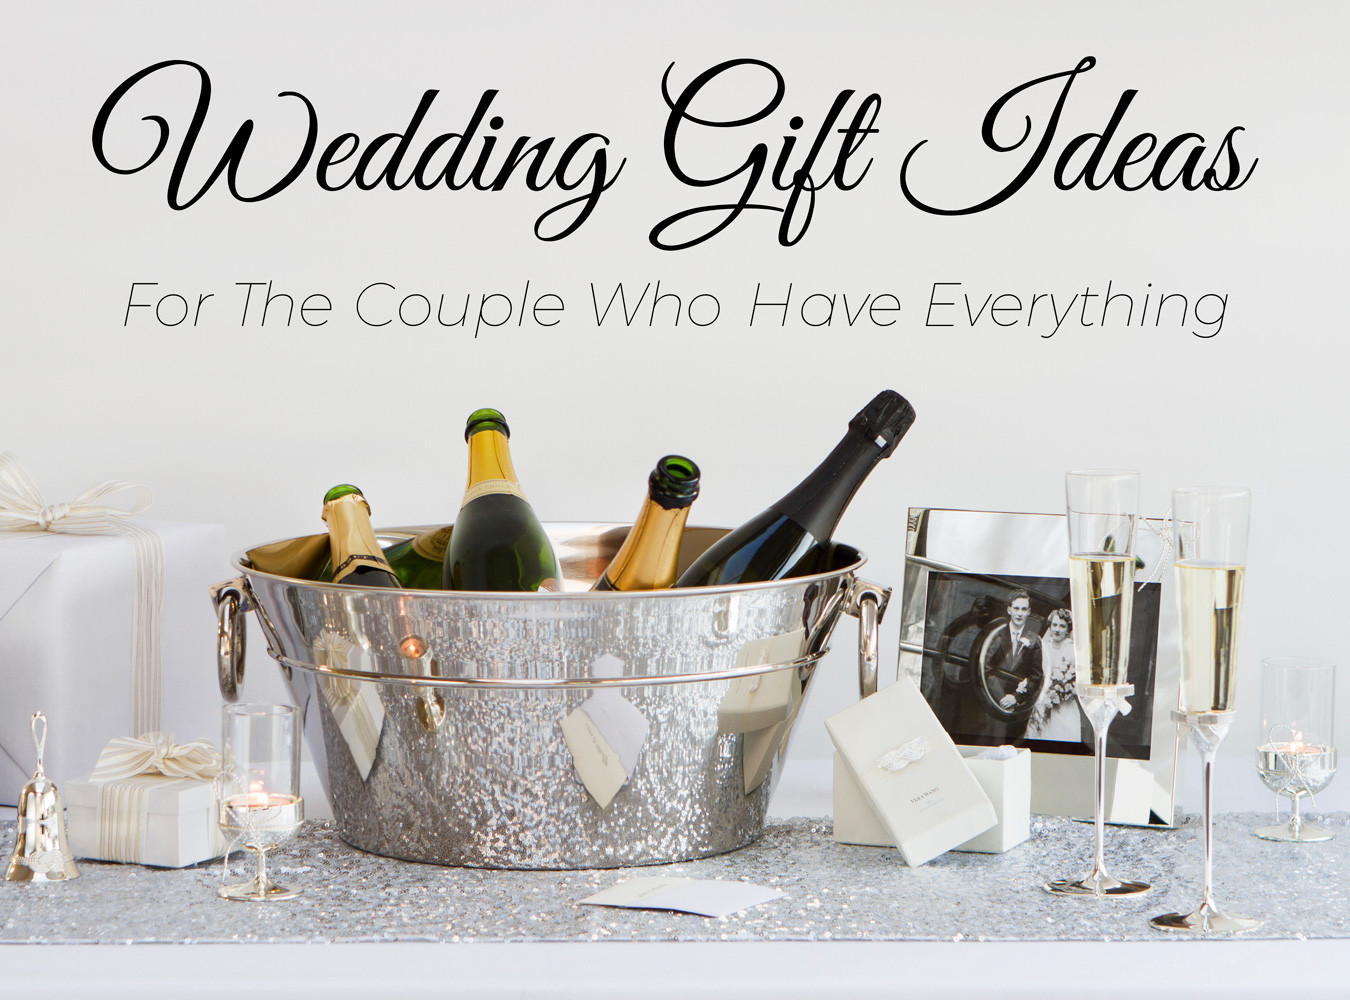 Couple Wedding Gift Ideas
 5 Wedding Gift Ideas for the Couple Who Have Everything